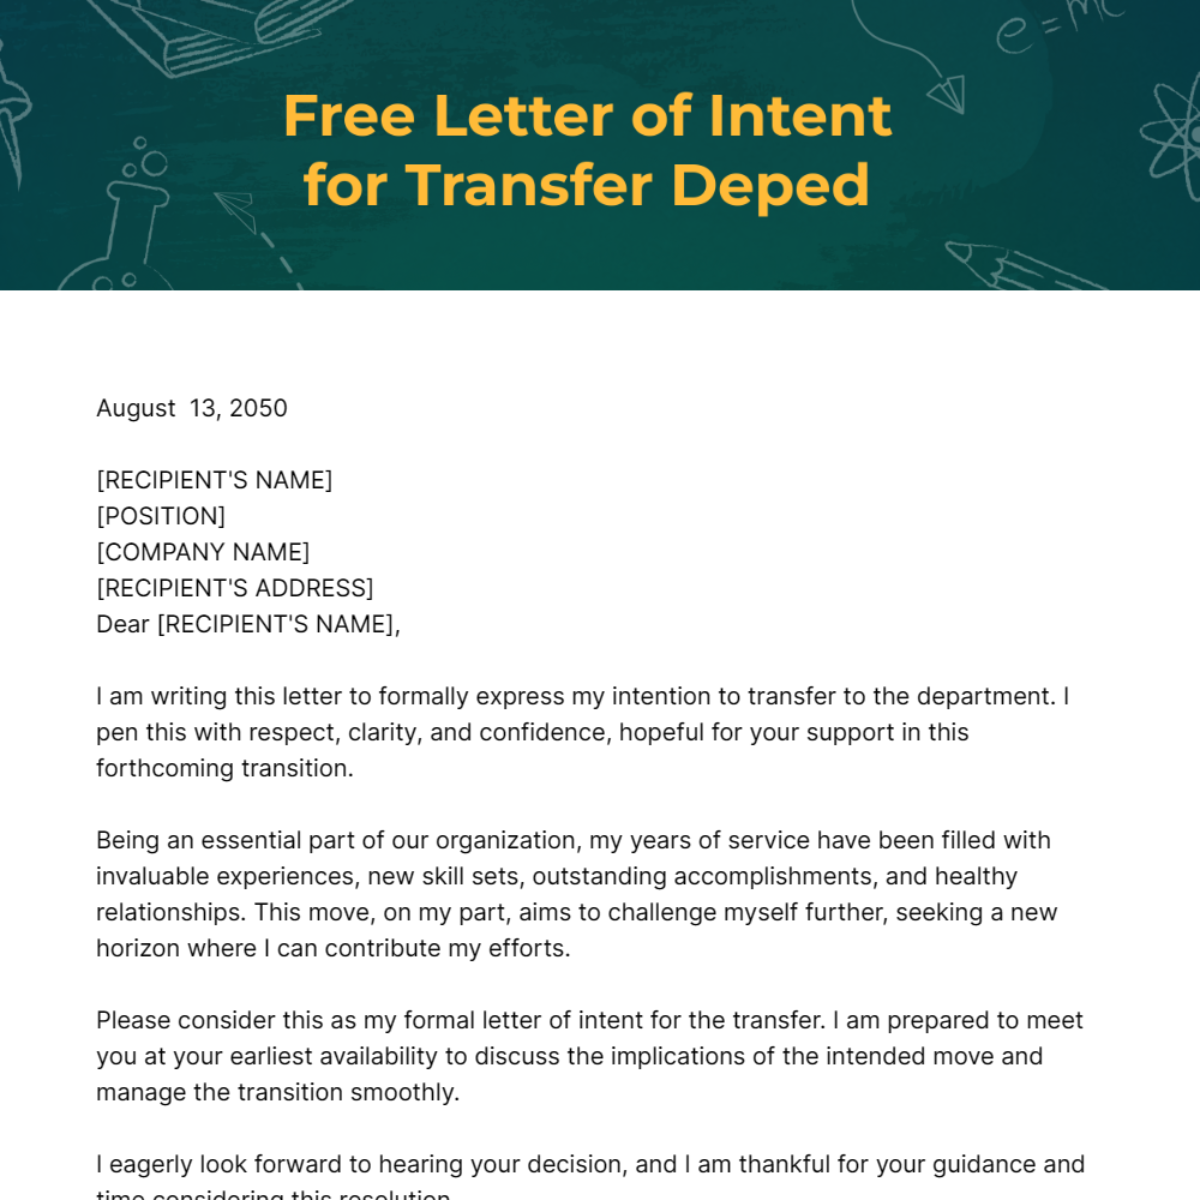 Letter of Intent for Transfer Deped Template